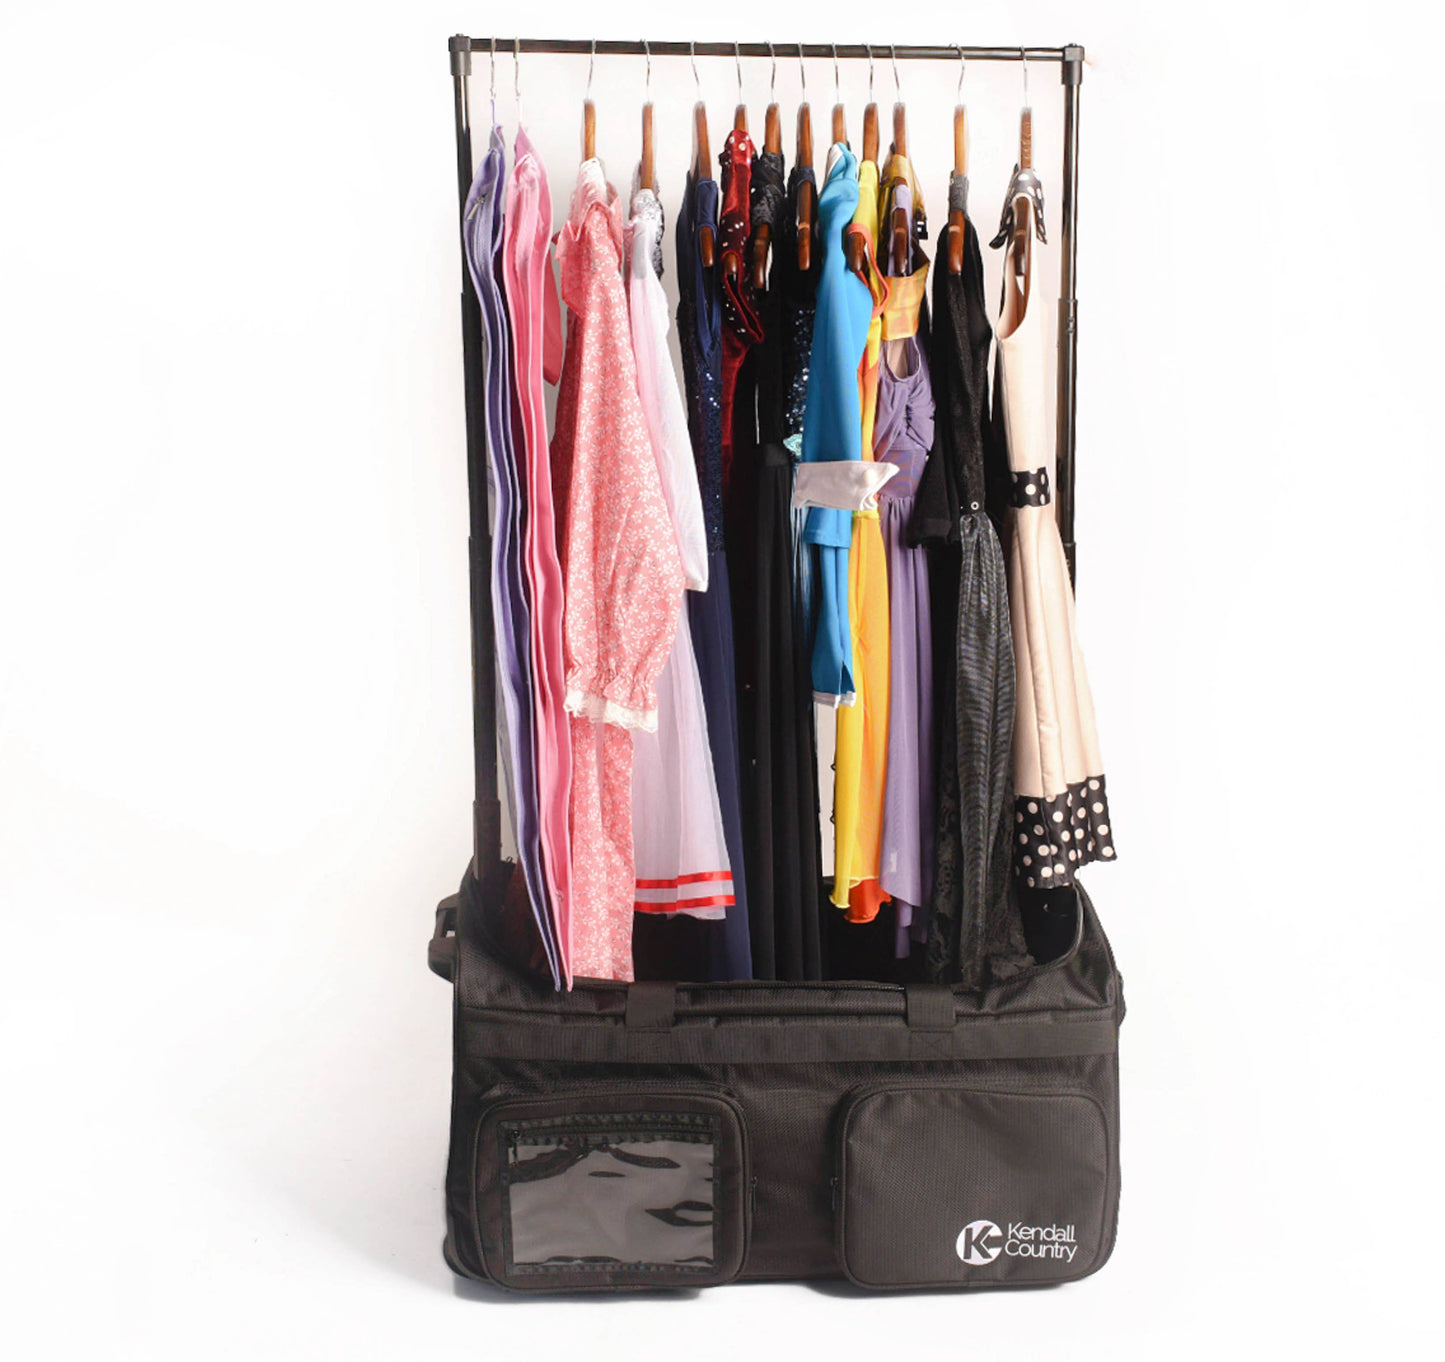 Costume Rolling Dance Bag with Garment Rack -28"